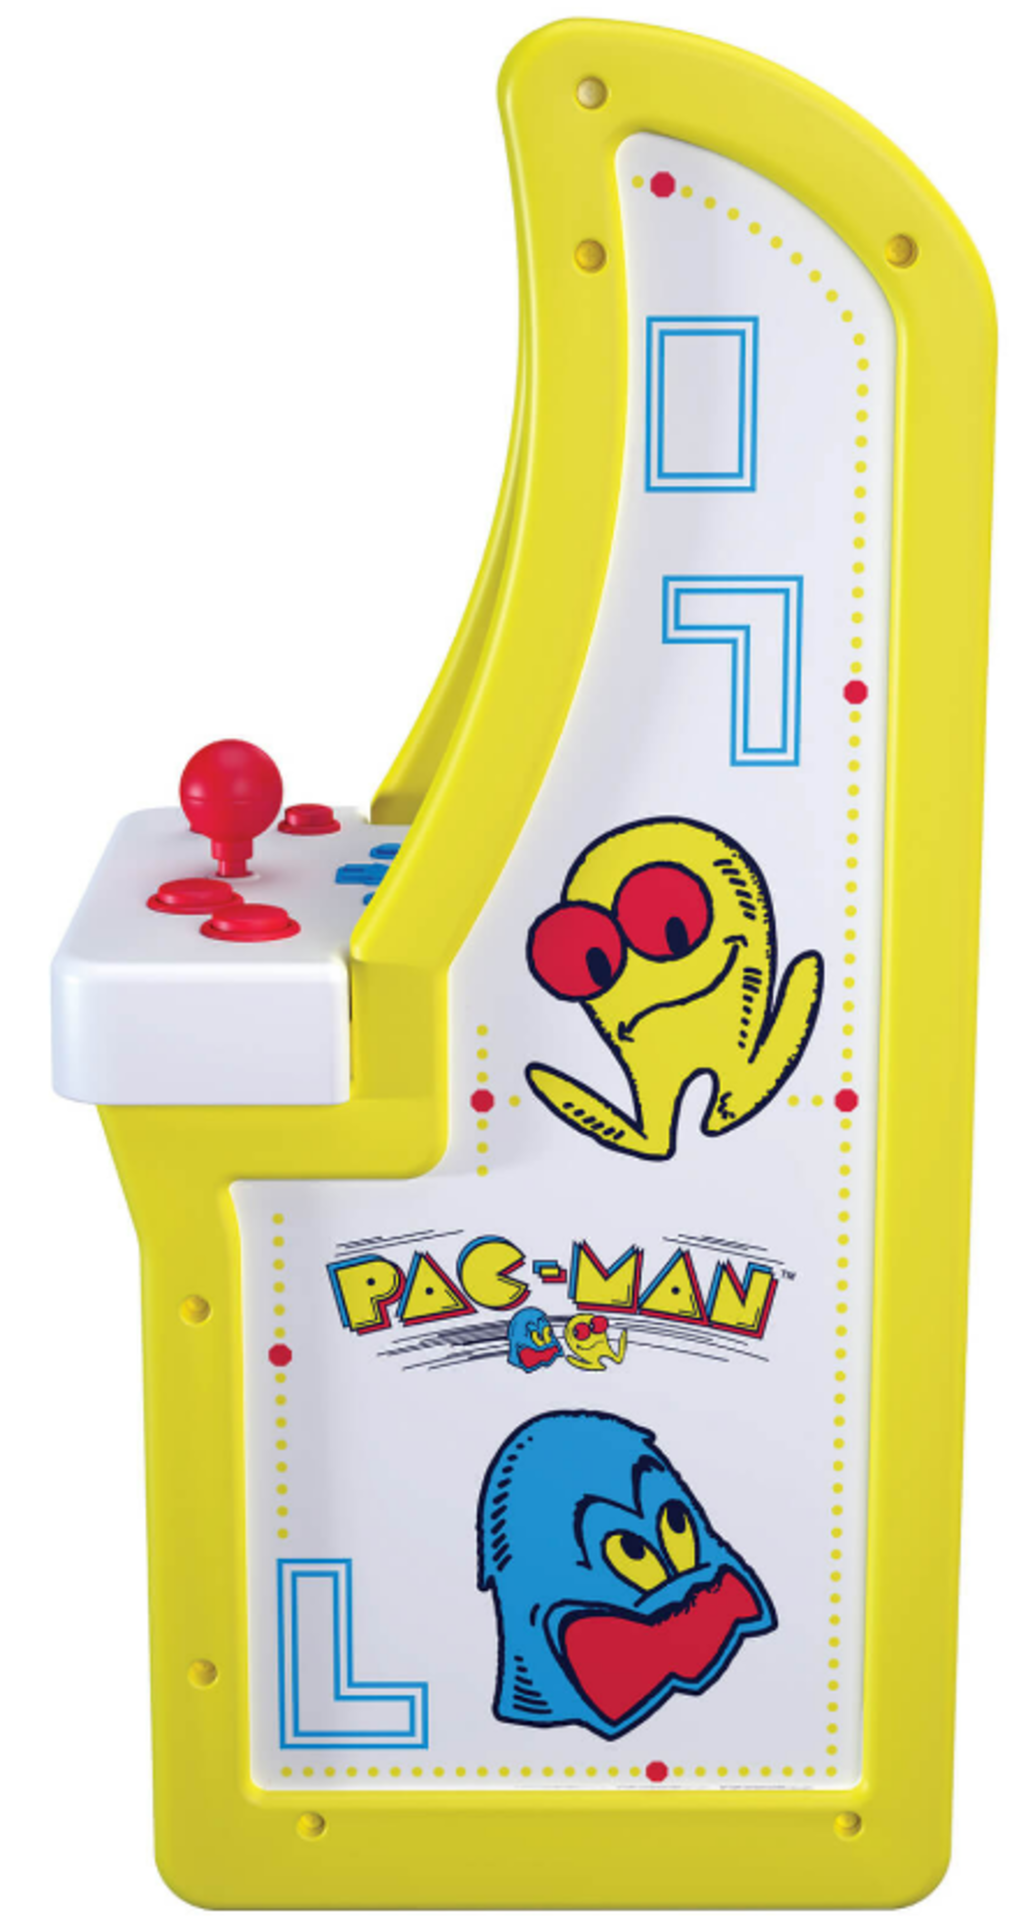 NEW & BOXED Arcade 1 Up - Pacman Junior Arcade Machine. RRP £599.98. Three classic games inc. Pac- - Image 5 of 7